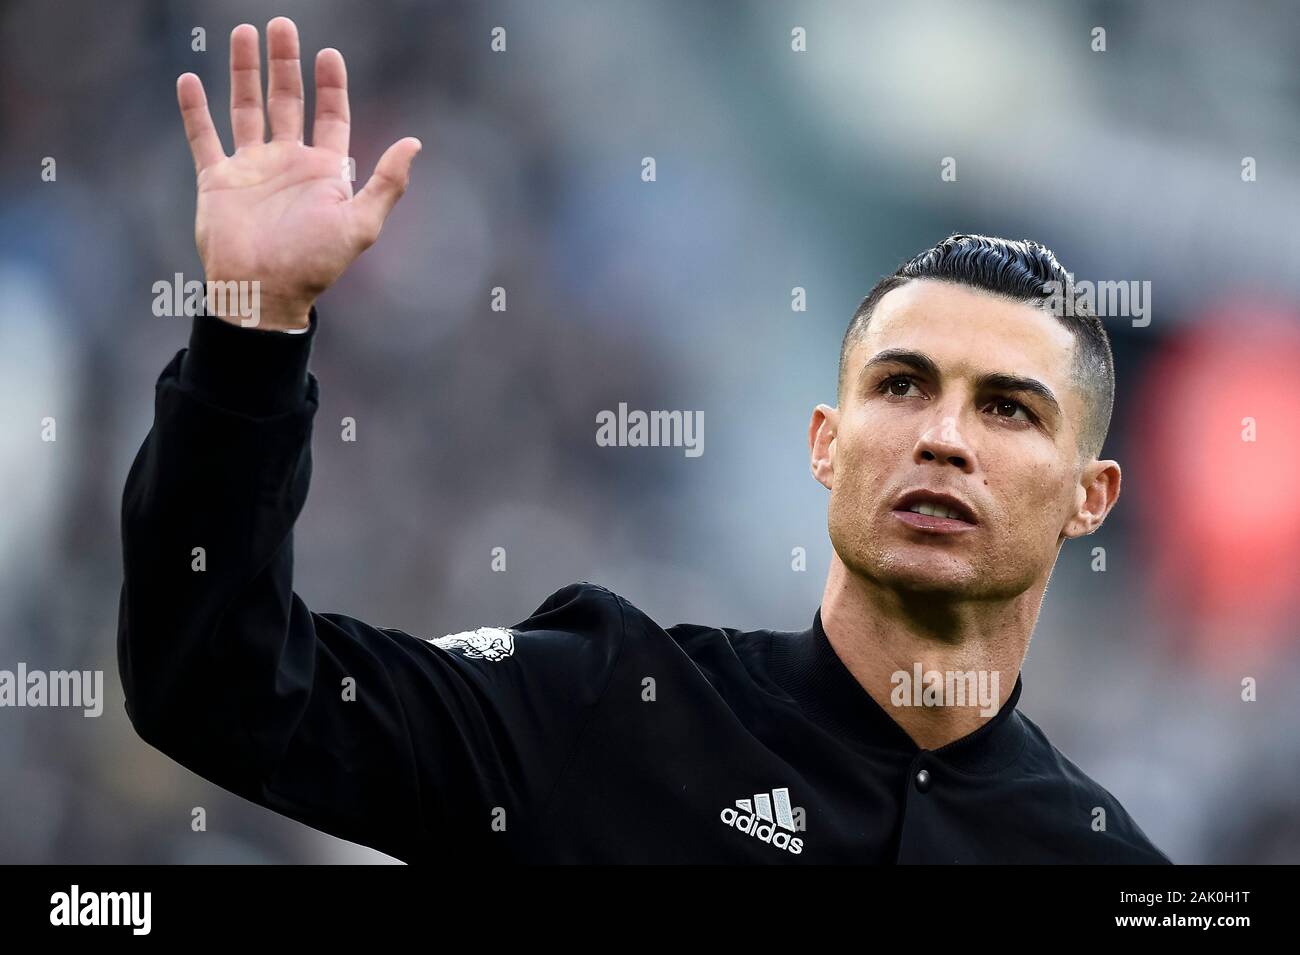 Turin, Italy - 06 January, 2020: Cristiano Ronaldo of Juventus FC gestures prior to the Serie A football match between Juventus FC and Cagliari Calcio. Juventus FC won 4-0 over Cagliari Calcio. Credit: Nicolò Campo/Alamy Live News Stock Photo